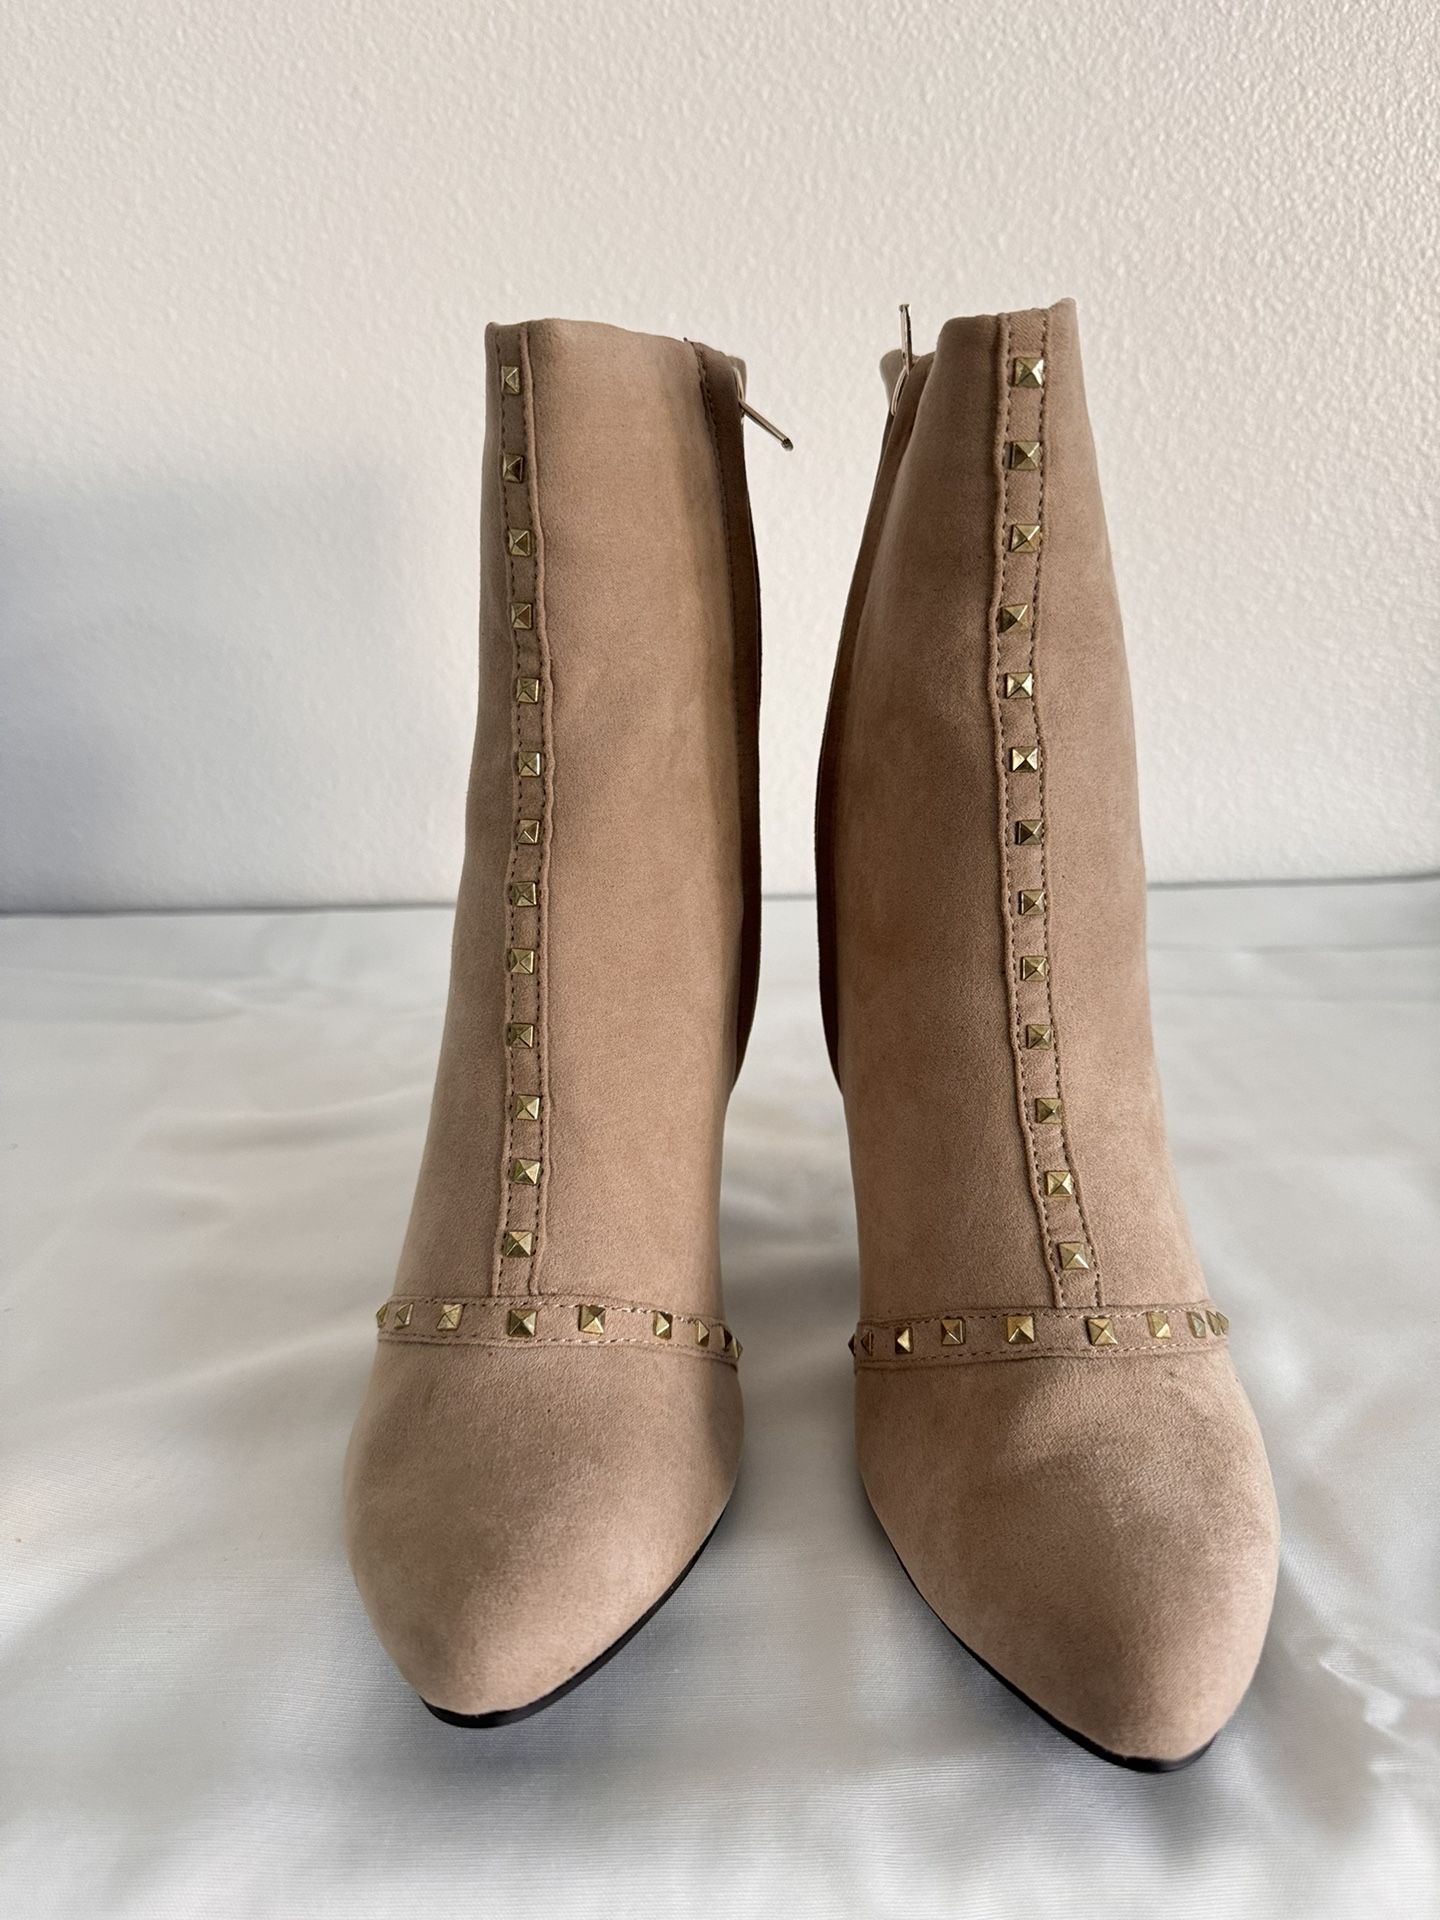 Kelly & Katie Ivory Boots